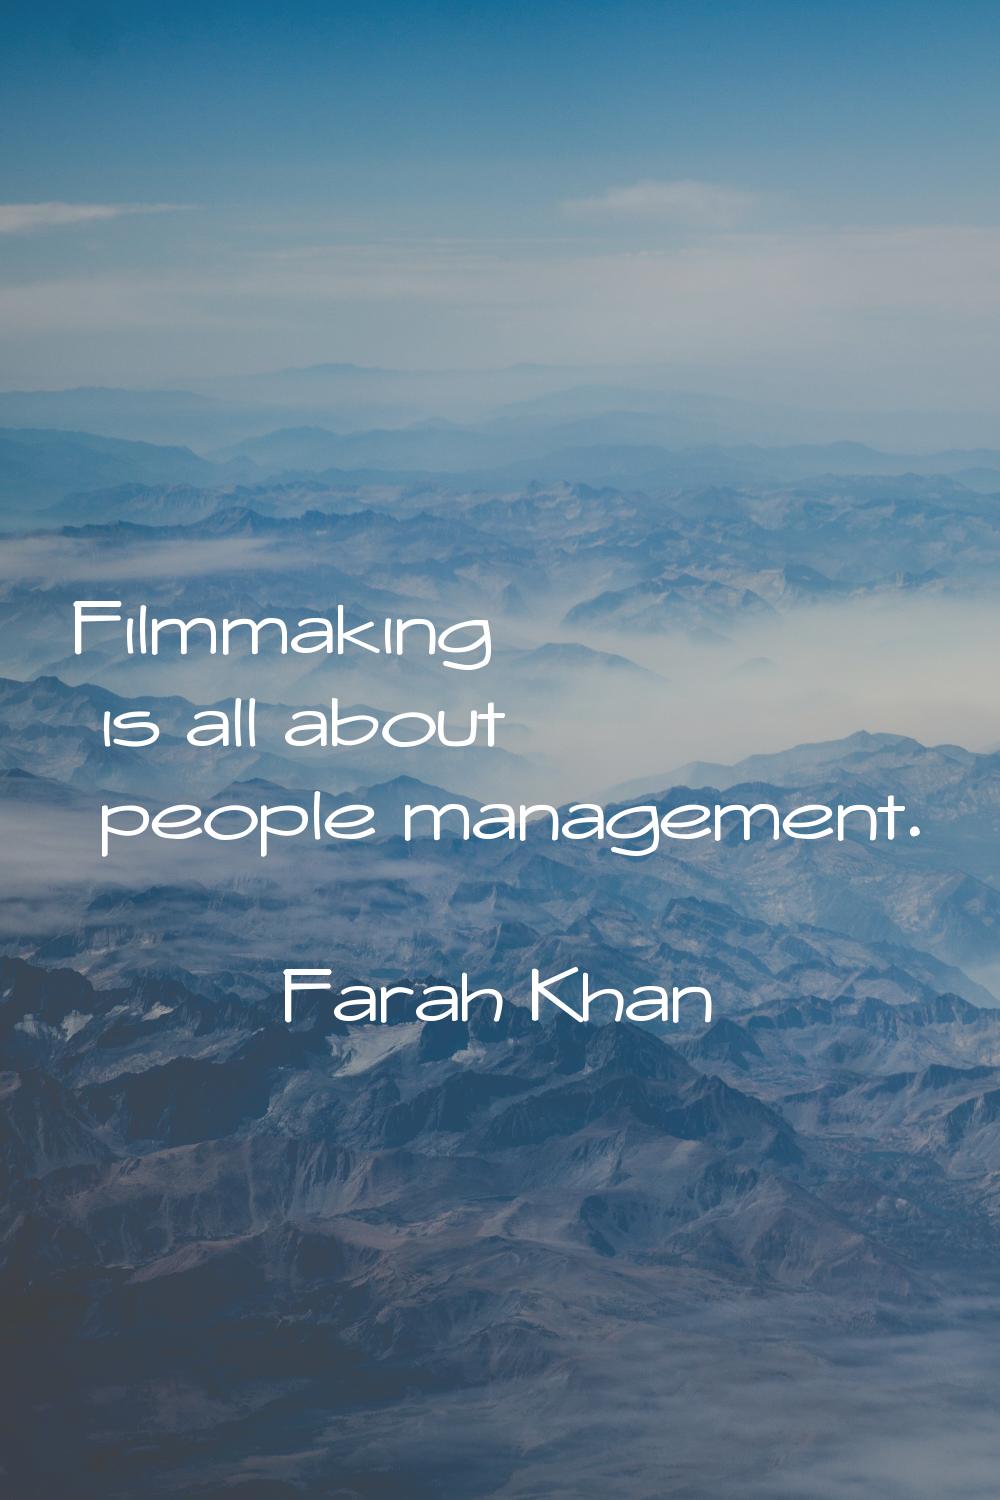 Filmmaking is all about people management.